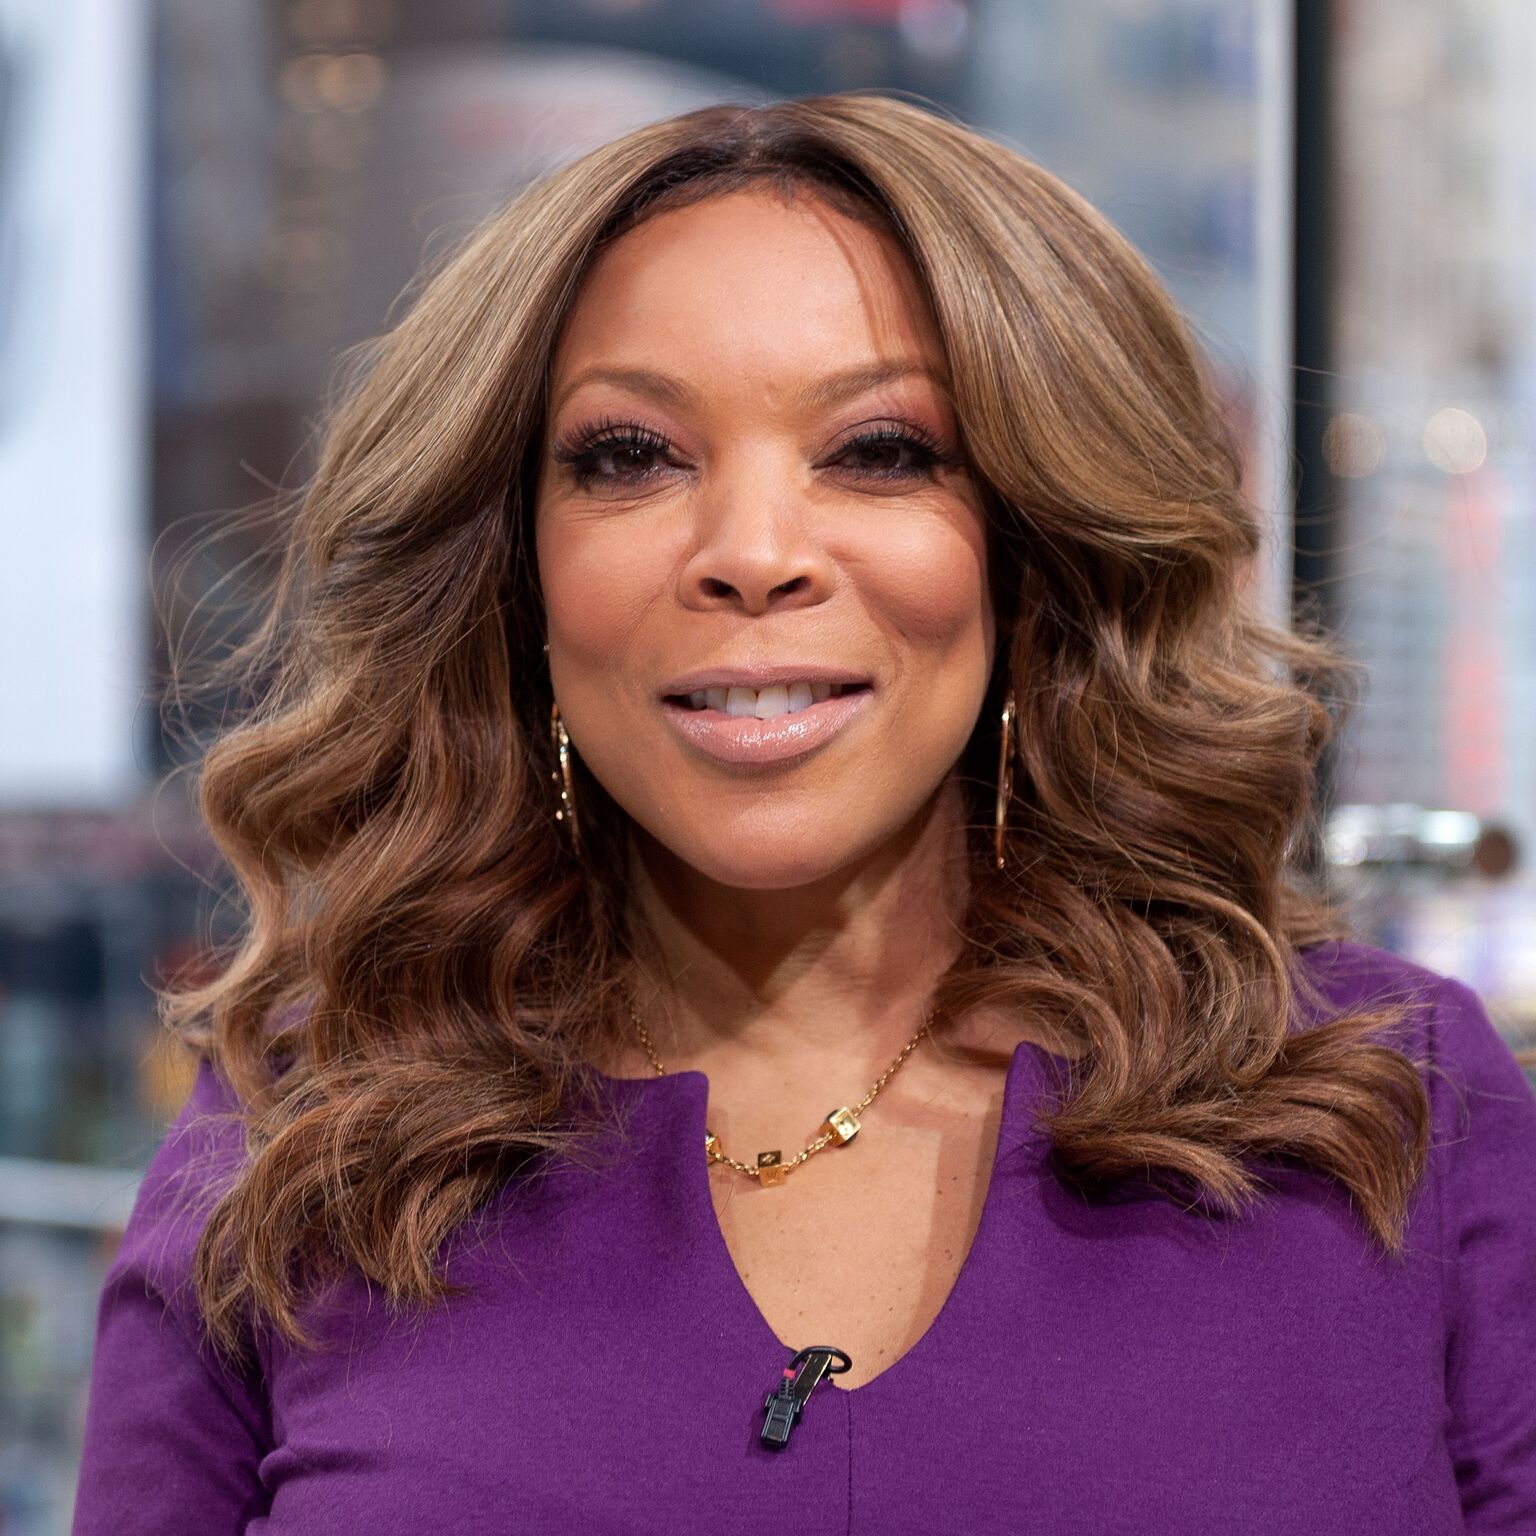 Wendy Williams visits "Extra" at their New York studios at H&M in Times Square on January 21, 2015 in New York City. | Photo: Getty Images